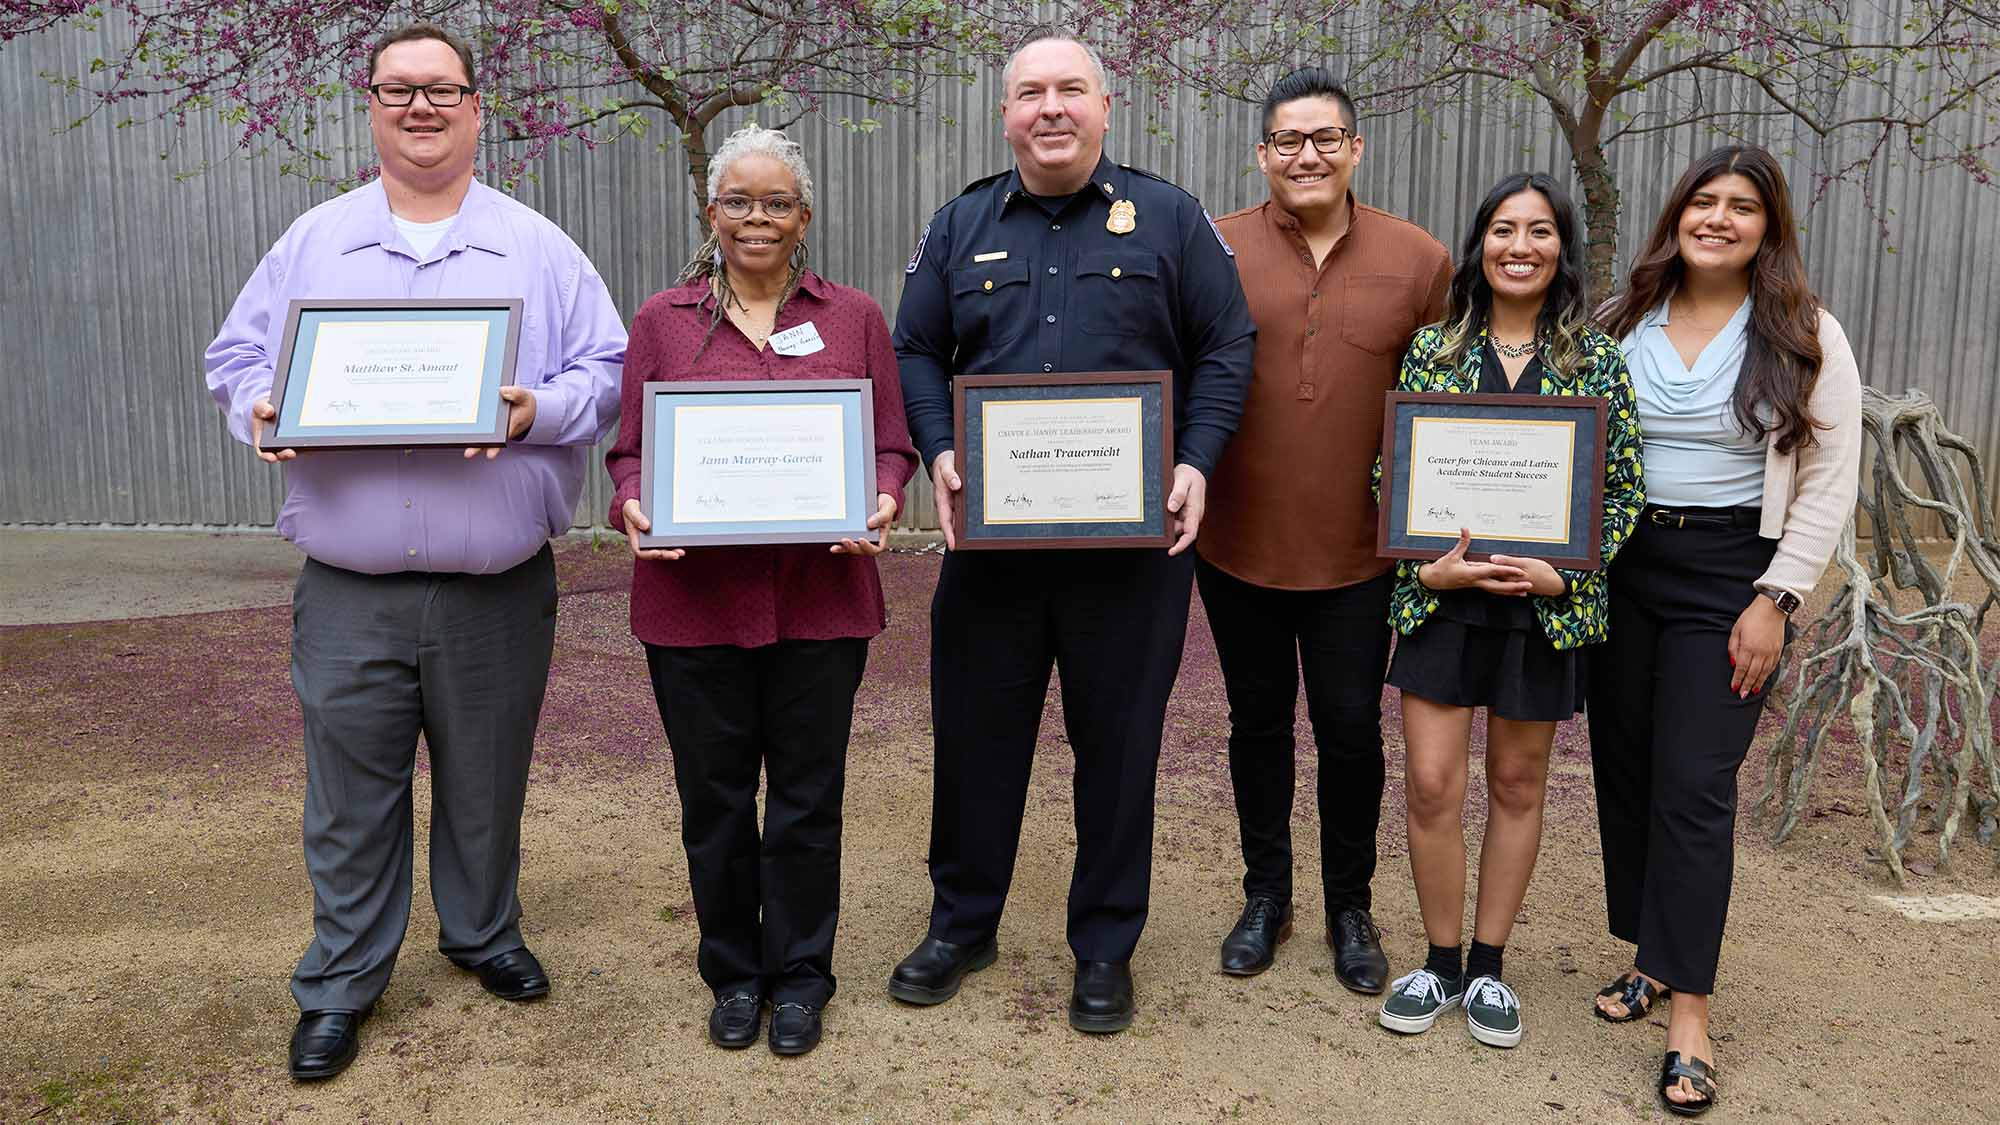 six people stand together holding certificates to show receiving Soaring to New Heights award